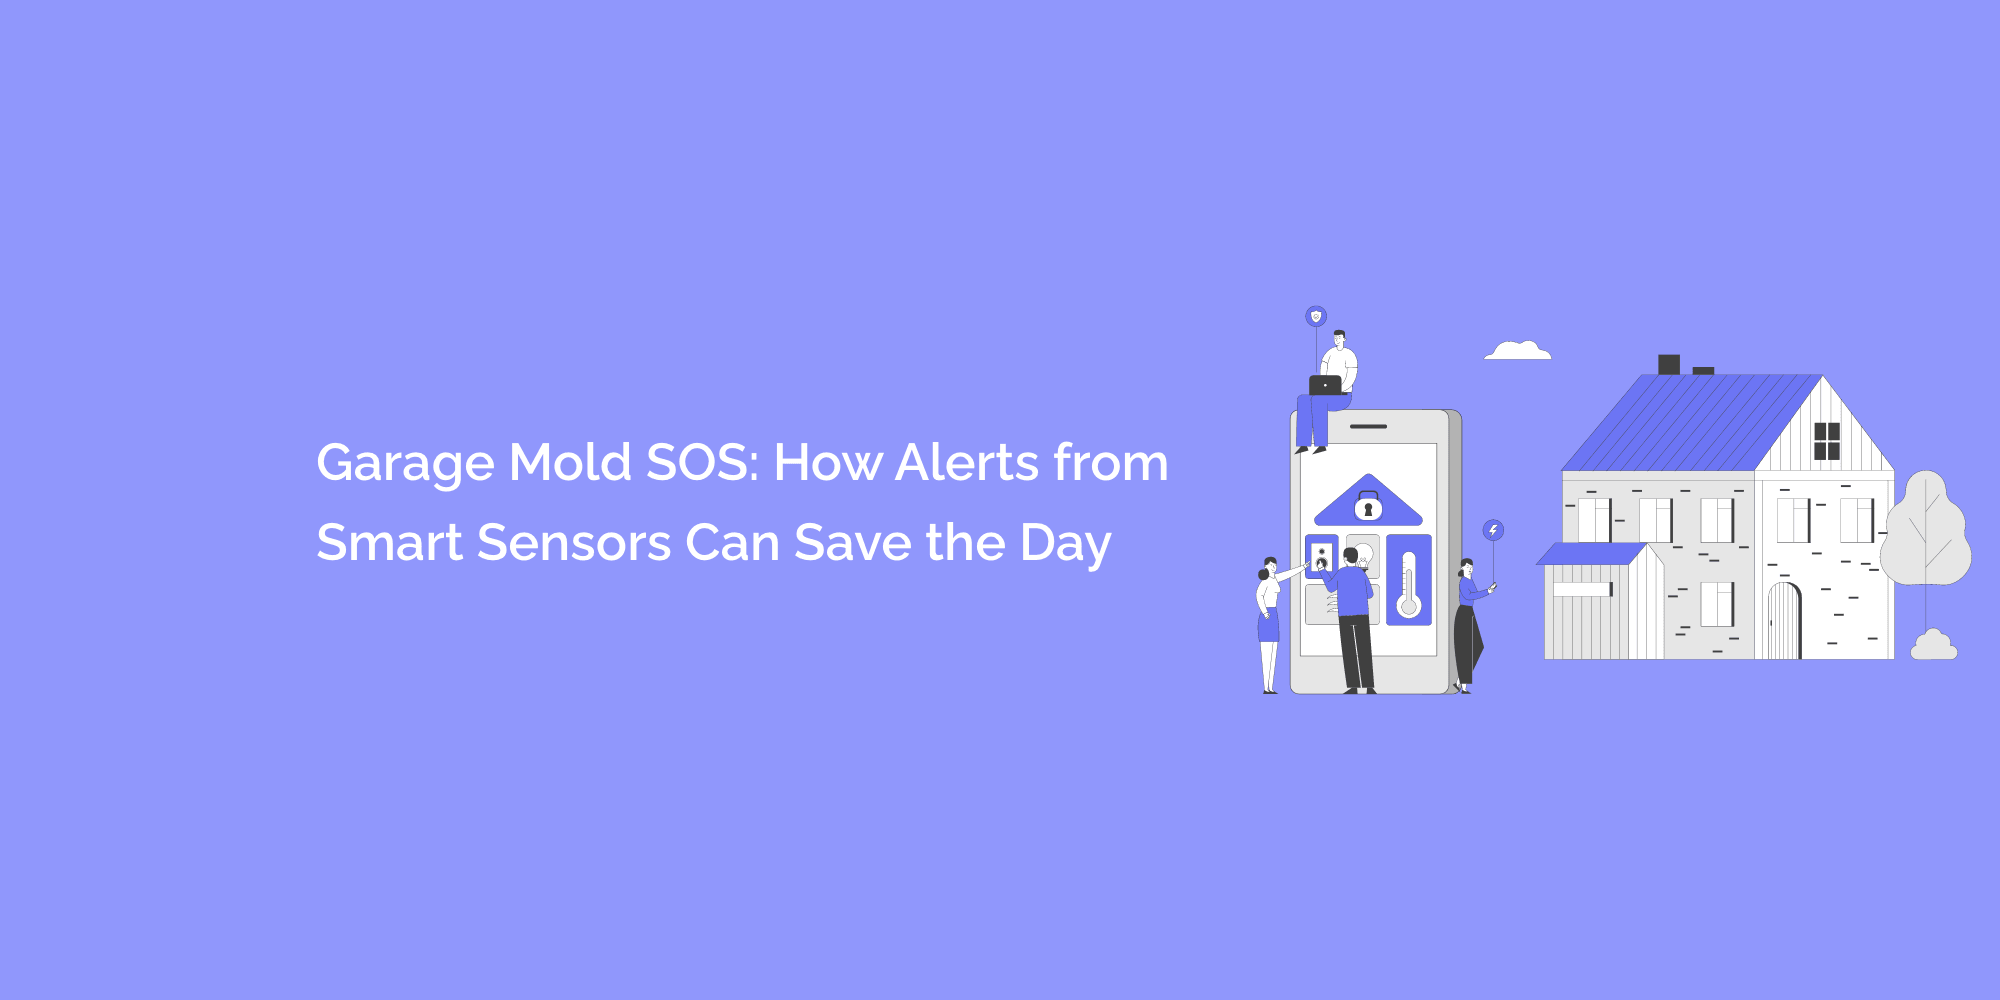 Garage Mold SOS: How Alerts from Smart Sensors Can Save the Day